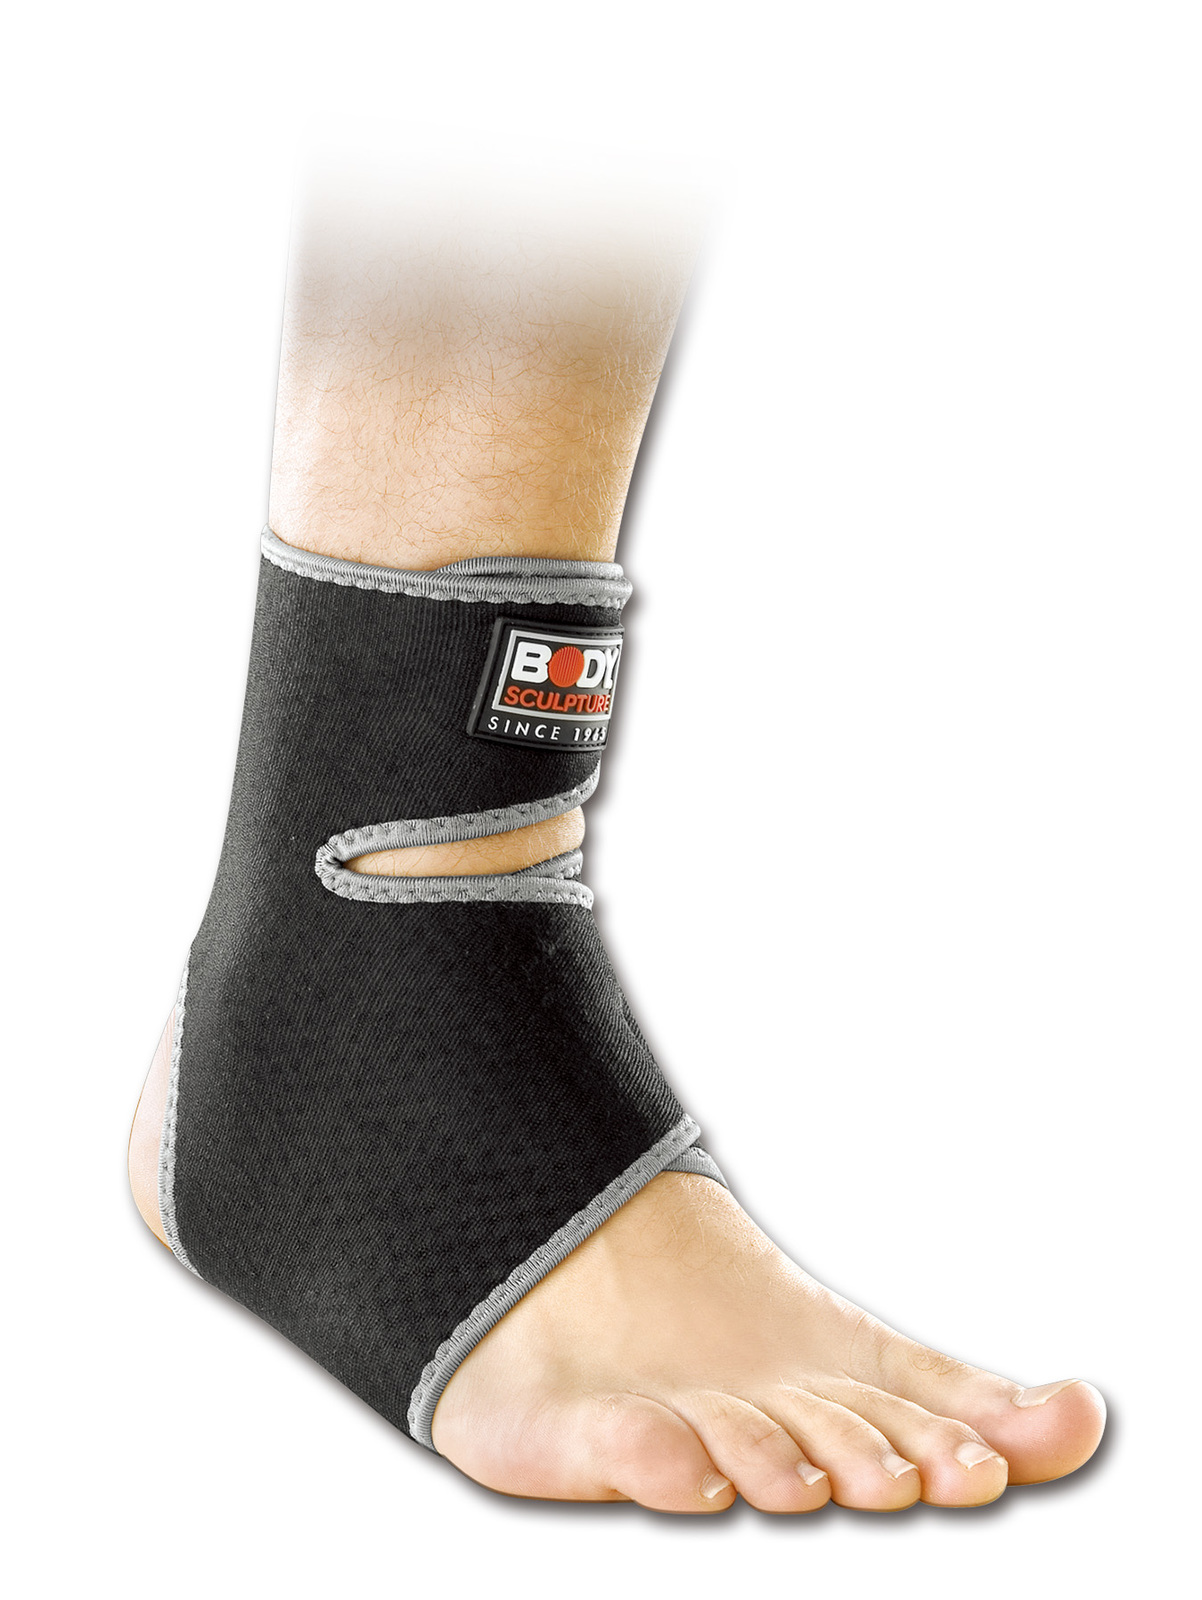 Body Sculpture Ankle Support with Terry Cloth